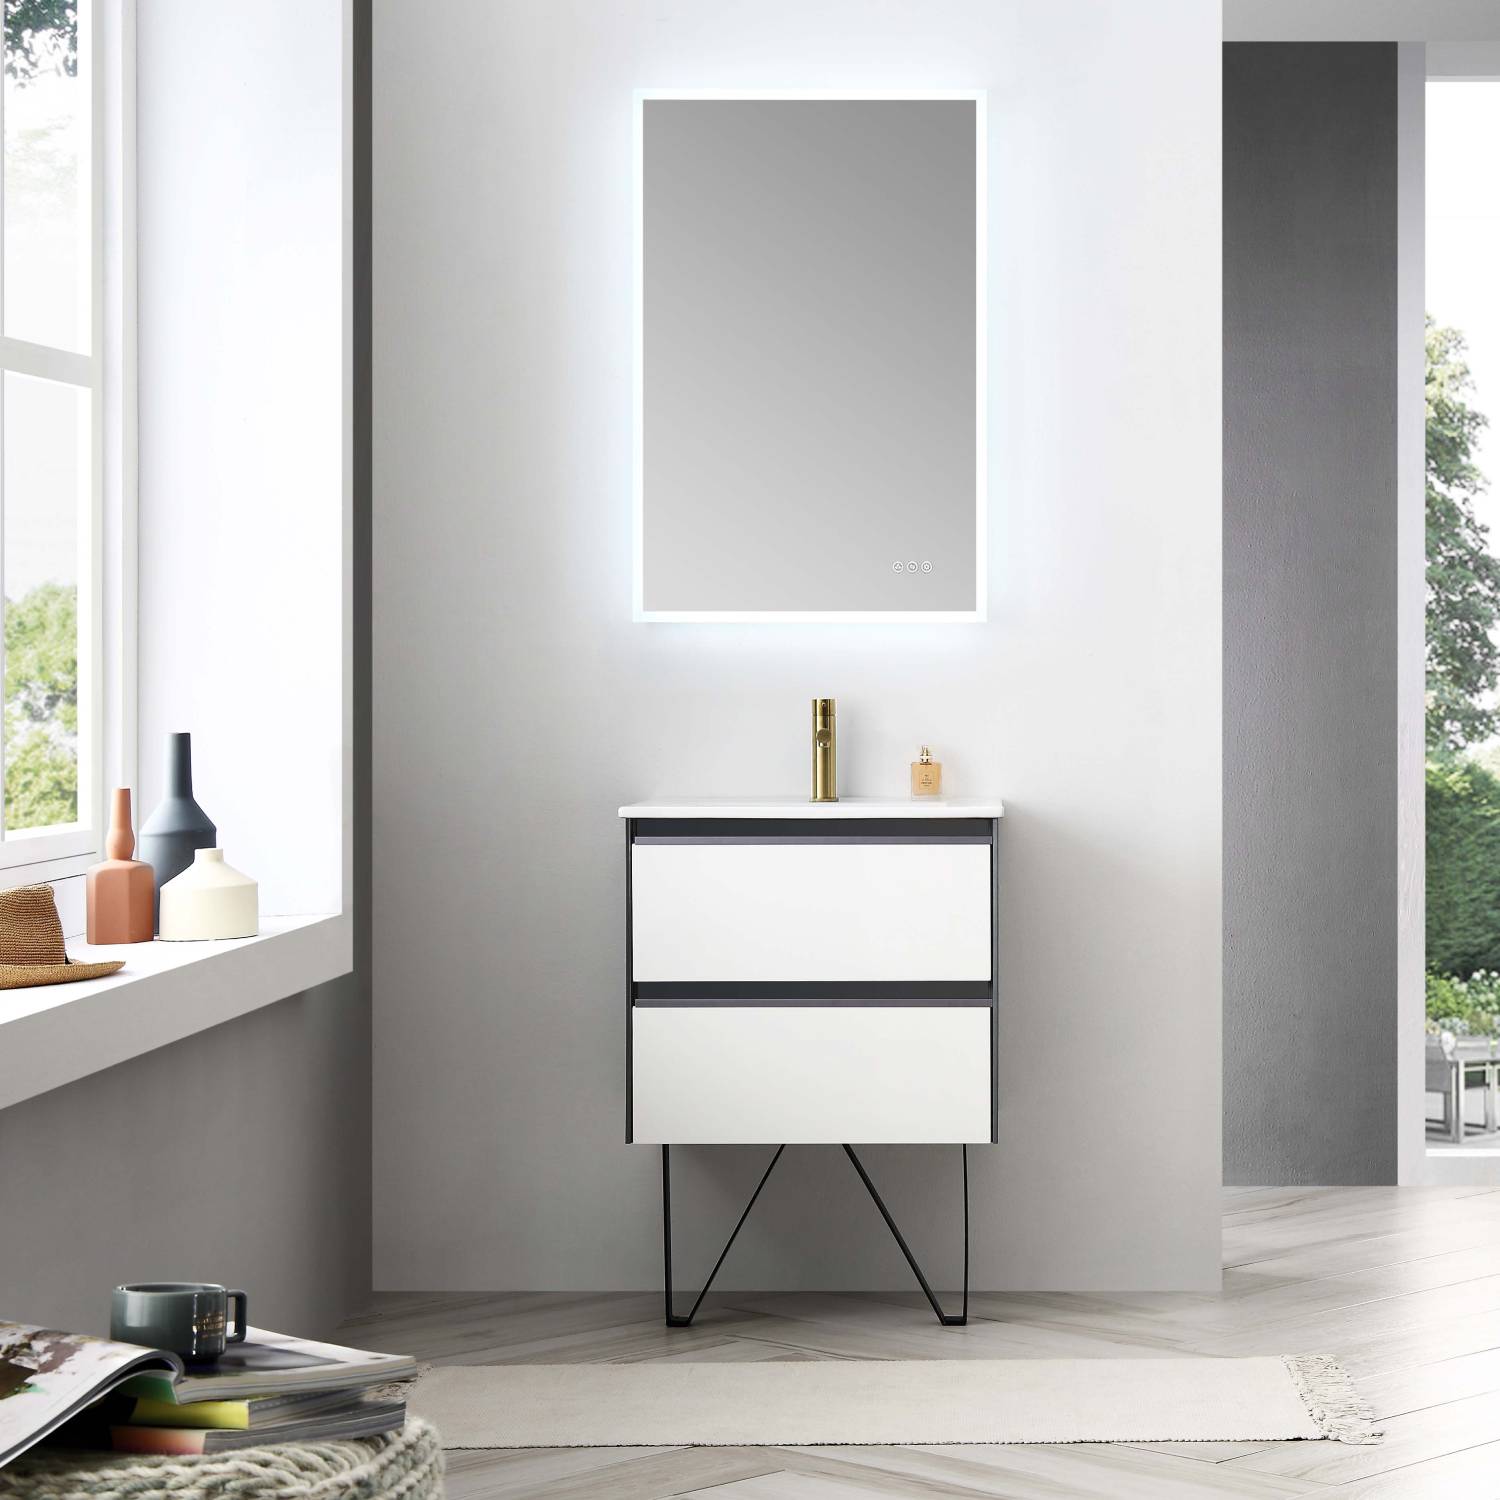 Berlin - 24 Inch Vanity Base Only - White - Molaix842708122628BerlinV8019 24 01